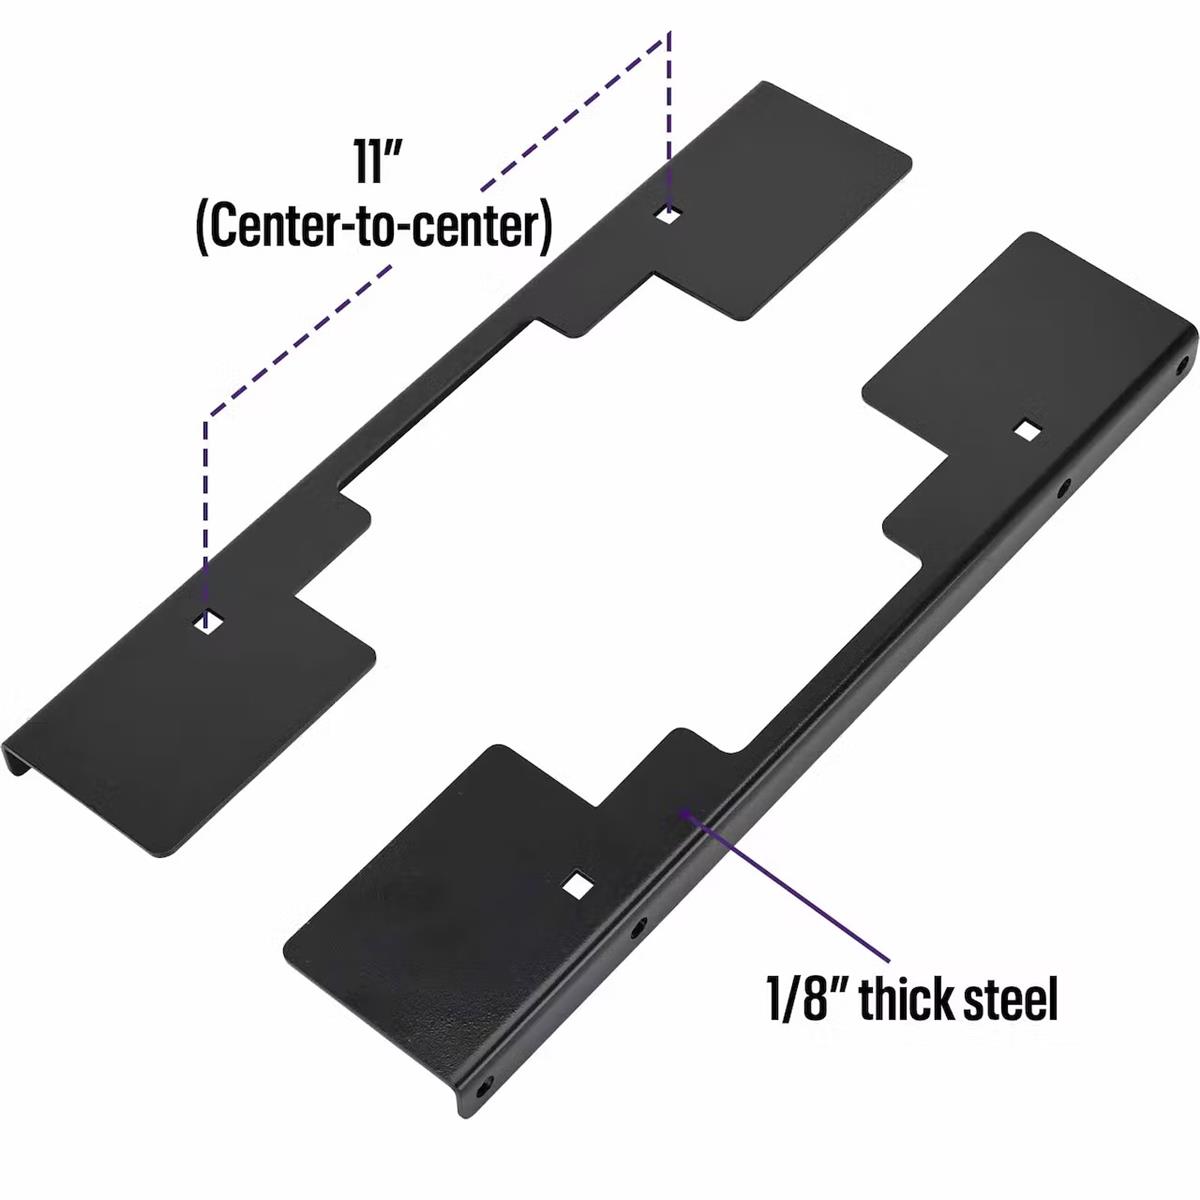 COM-5753 | COM-5753 Universal Seat Mounting Frame with Slider and Mounts Common Application13.jpg